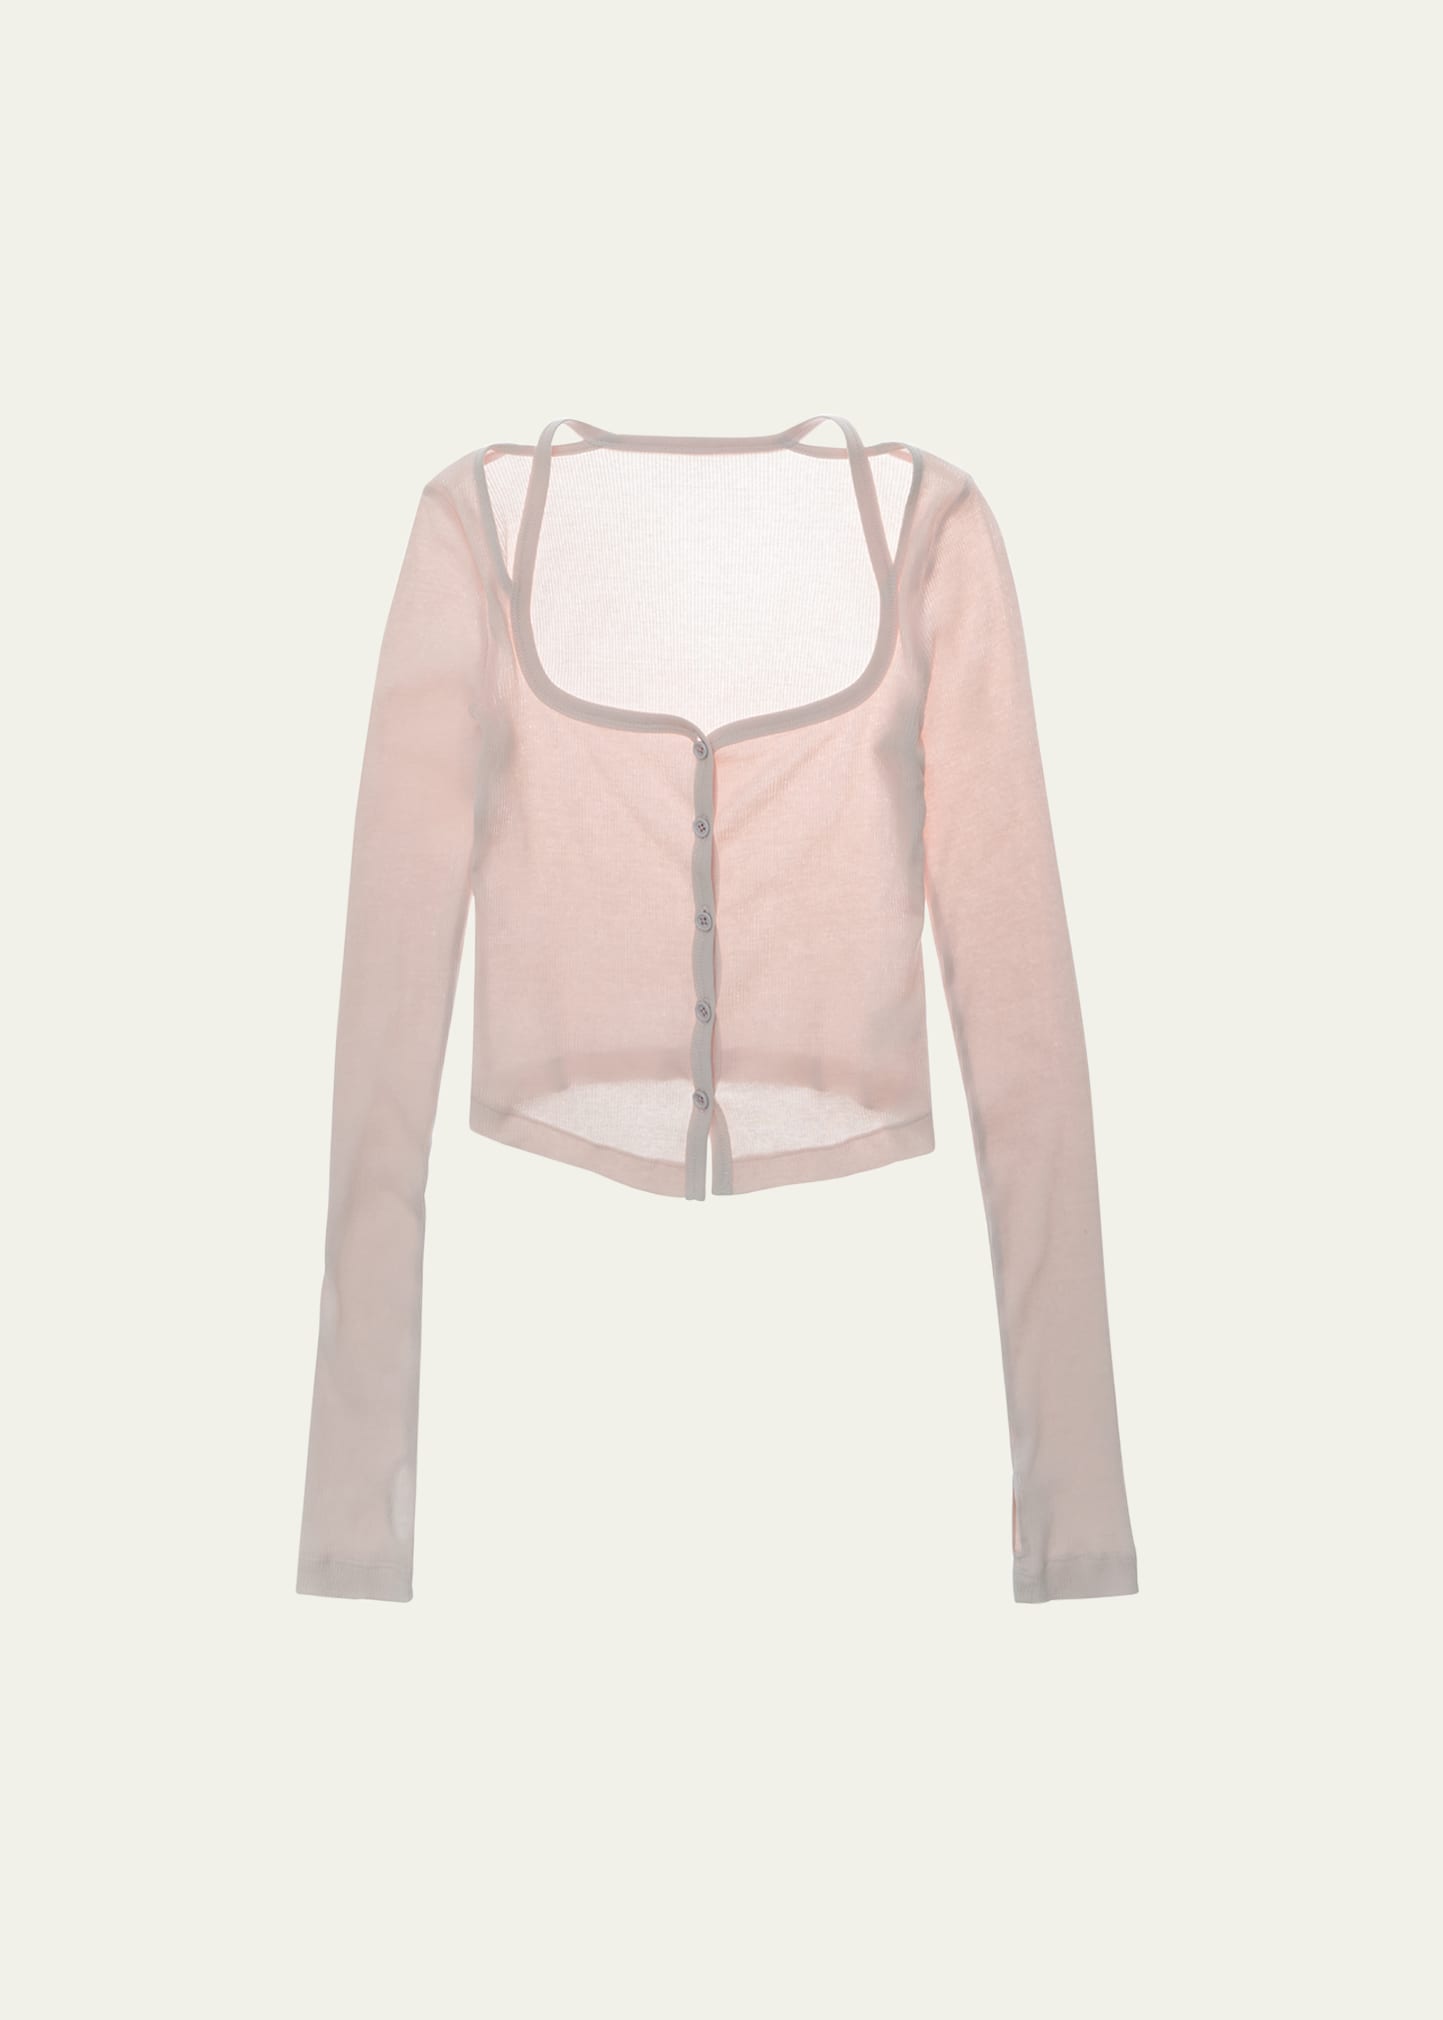 Helmut Lang Square Neck Cardigan in Lucid Pink, Blush. Size L (also in ).